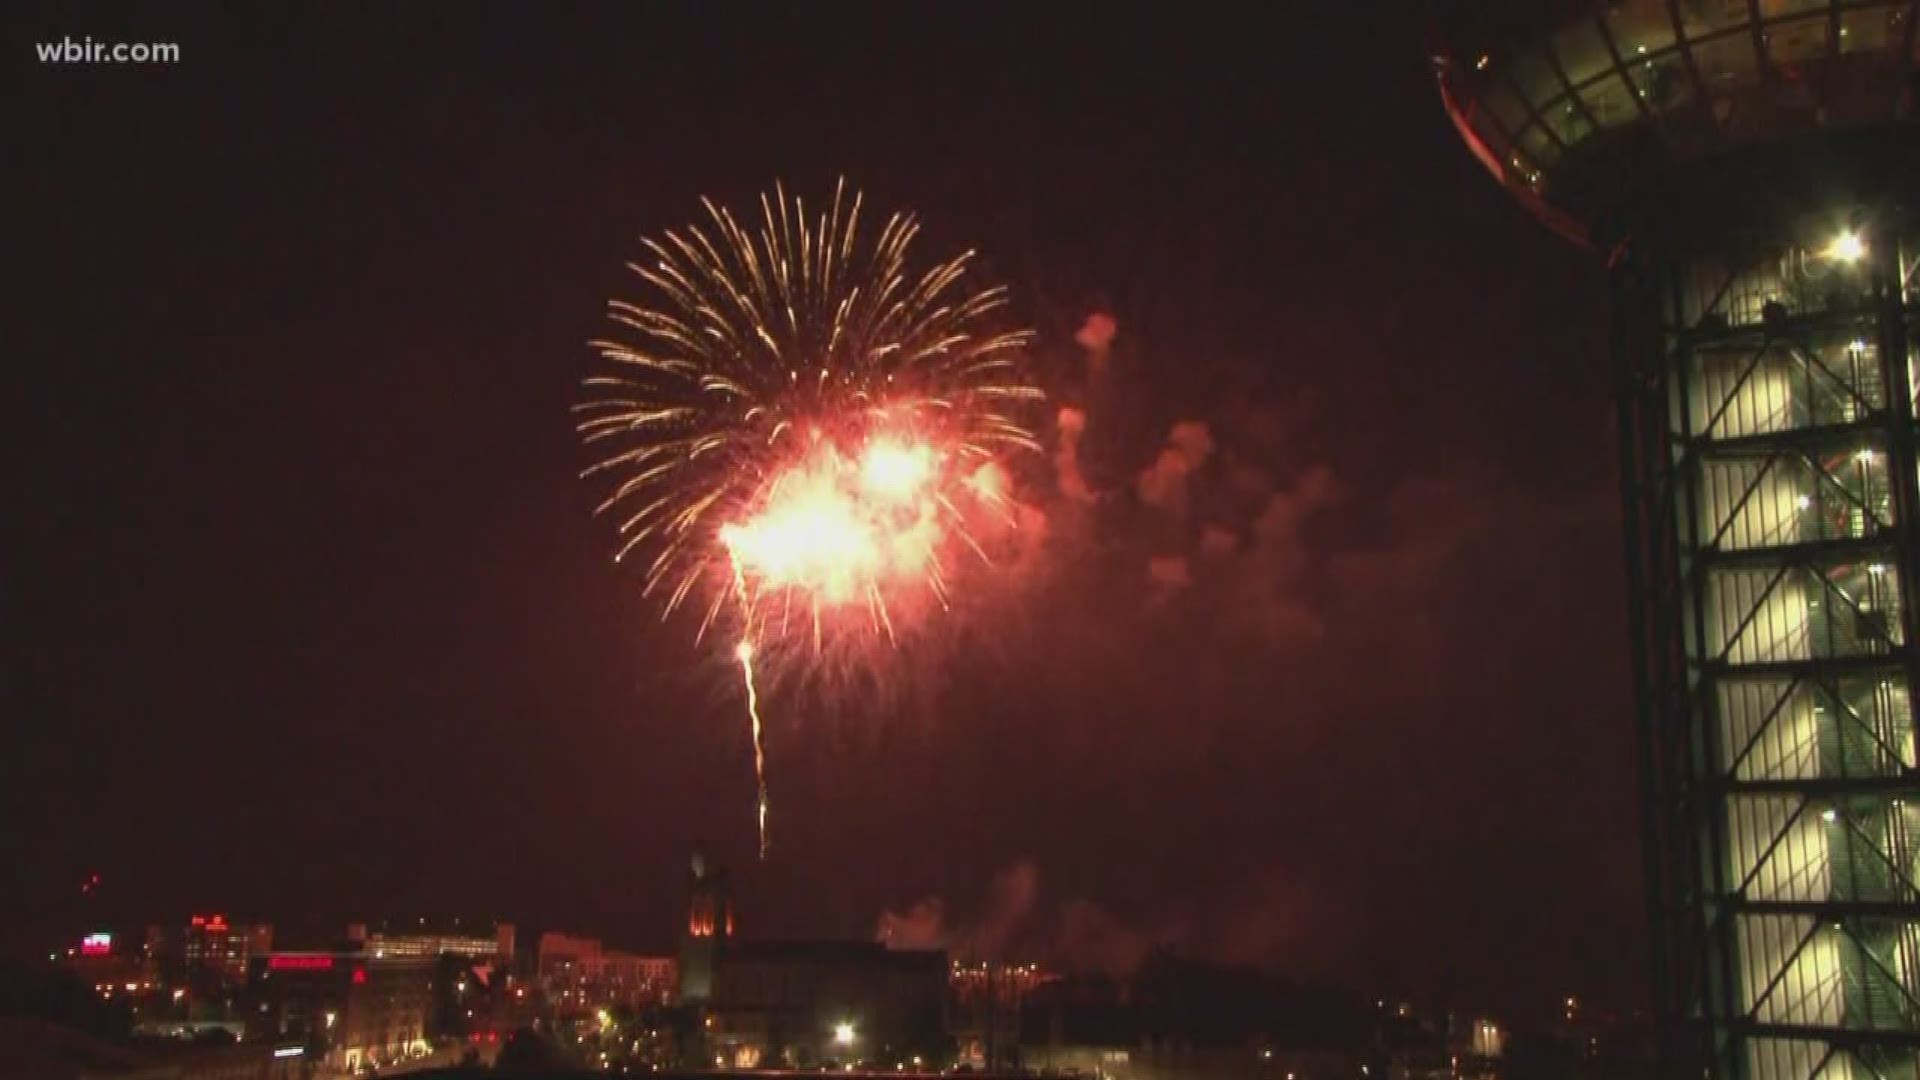 Music, fireworks, and lots of fun... Independence Day had it all in Knoxville!